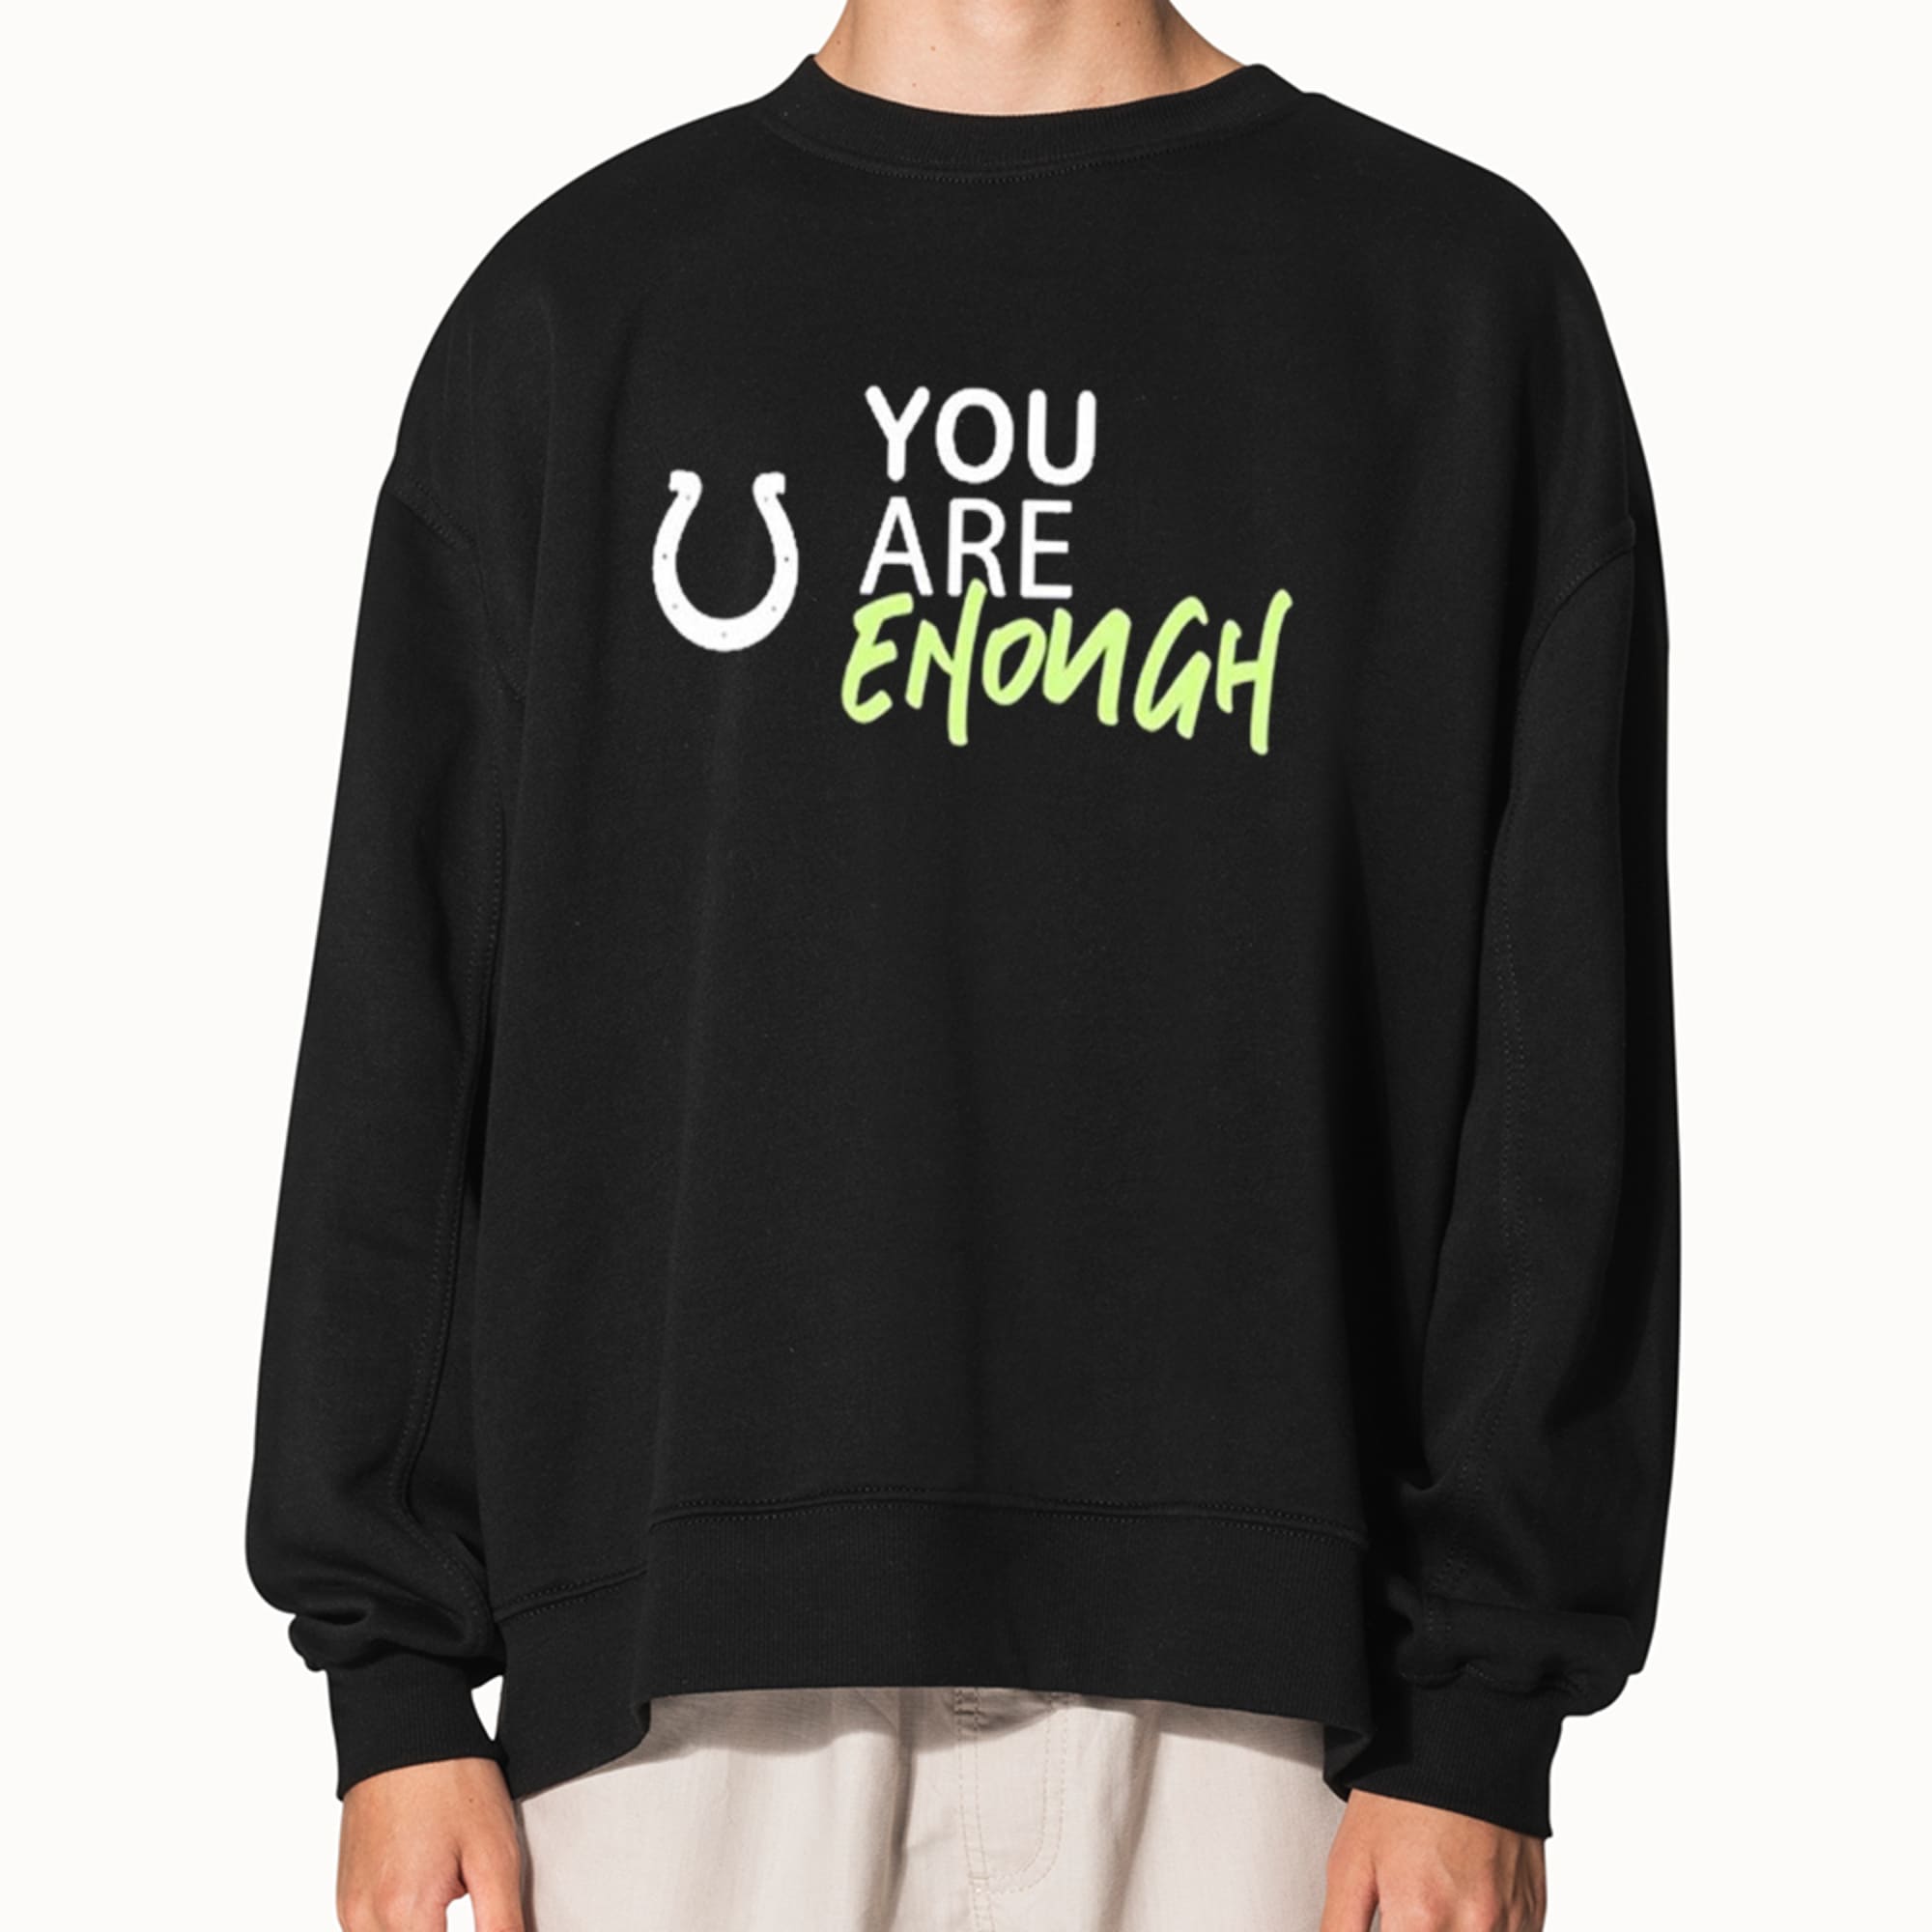 NFL Indianapolis Colts You Are Enough Sweatshirt